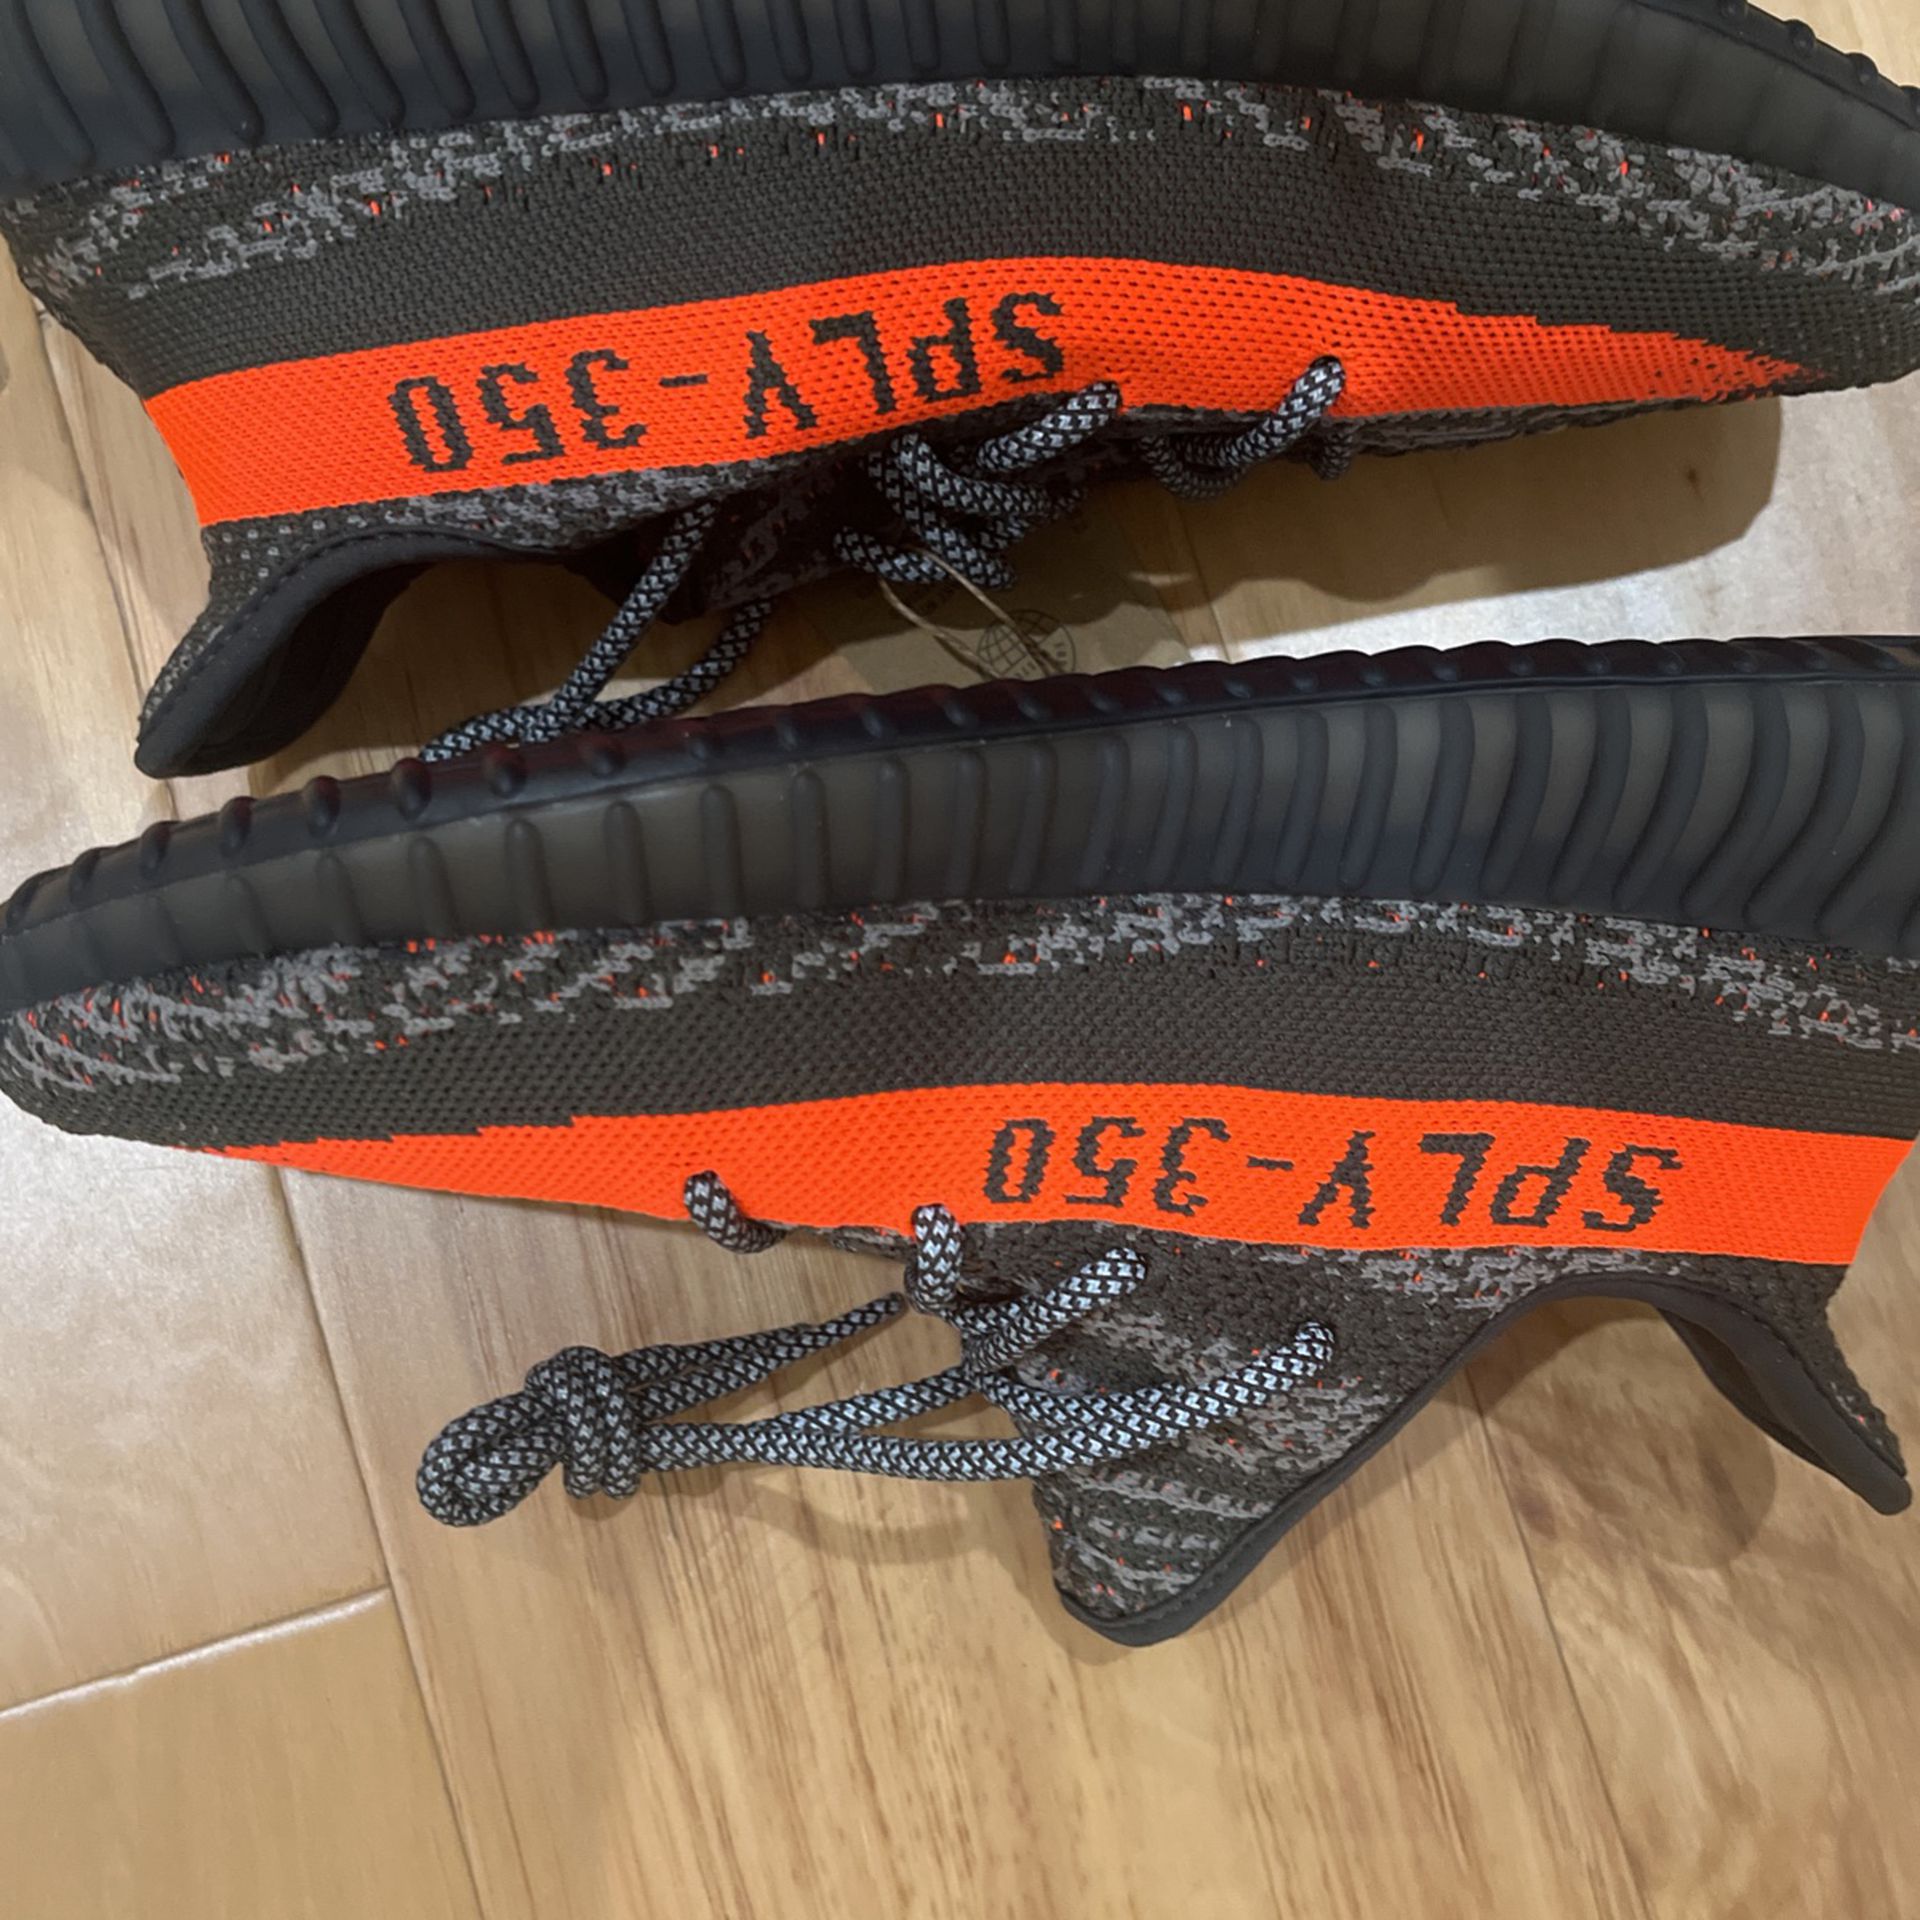 Yeezy Boost 350 Beluga Reflective Size 8 M for Sale in Downey, CA - OfferUp